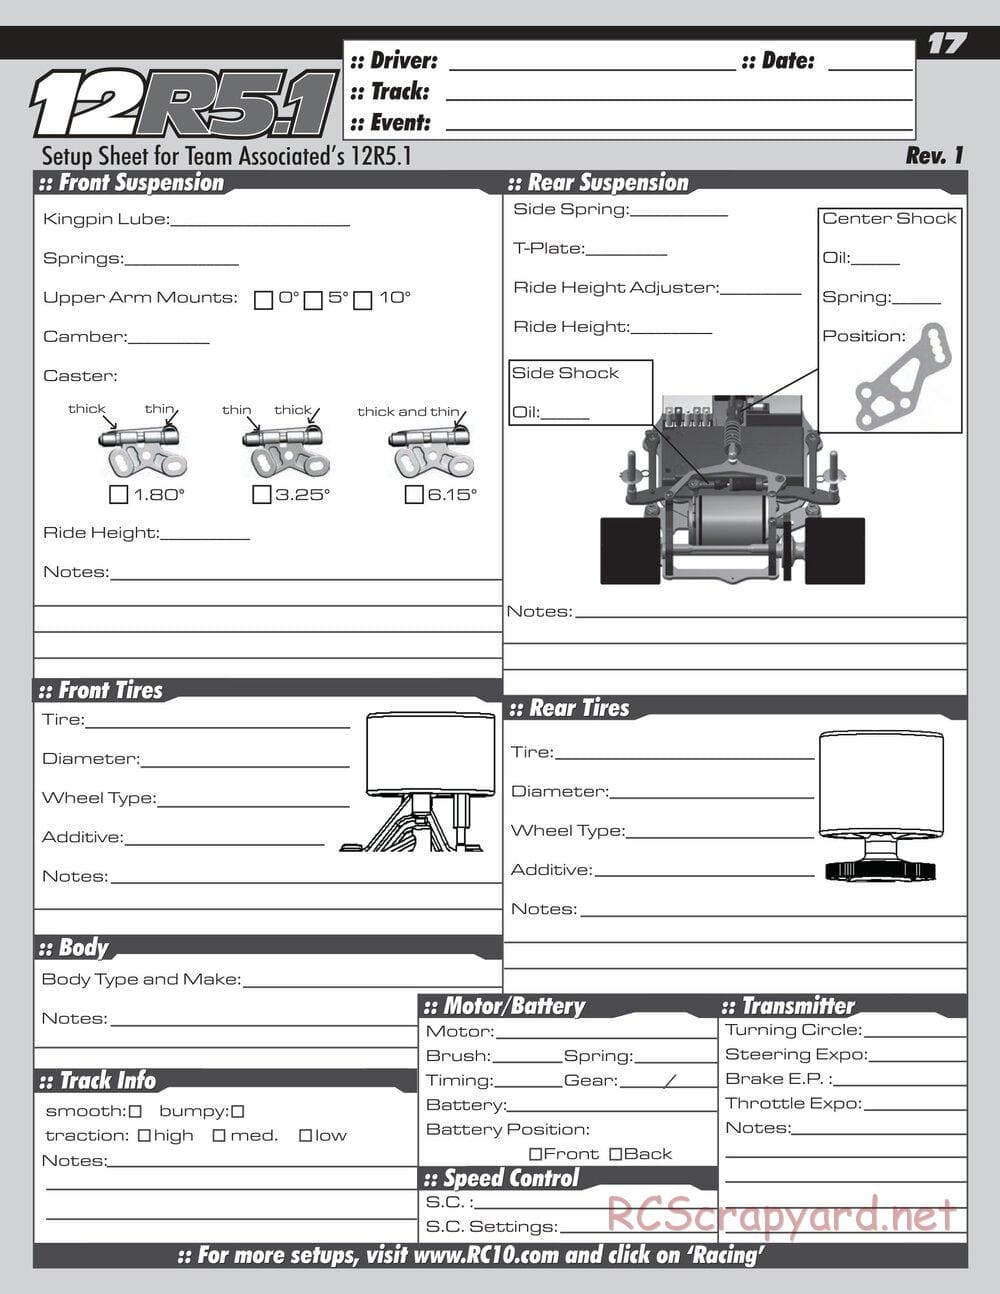 Team Associated - RC12R5.1 Factory Team - Manual - Page 17